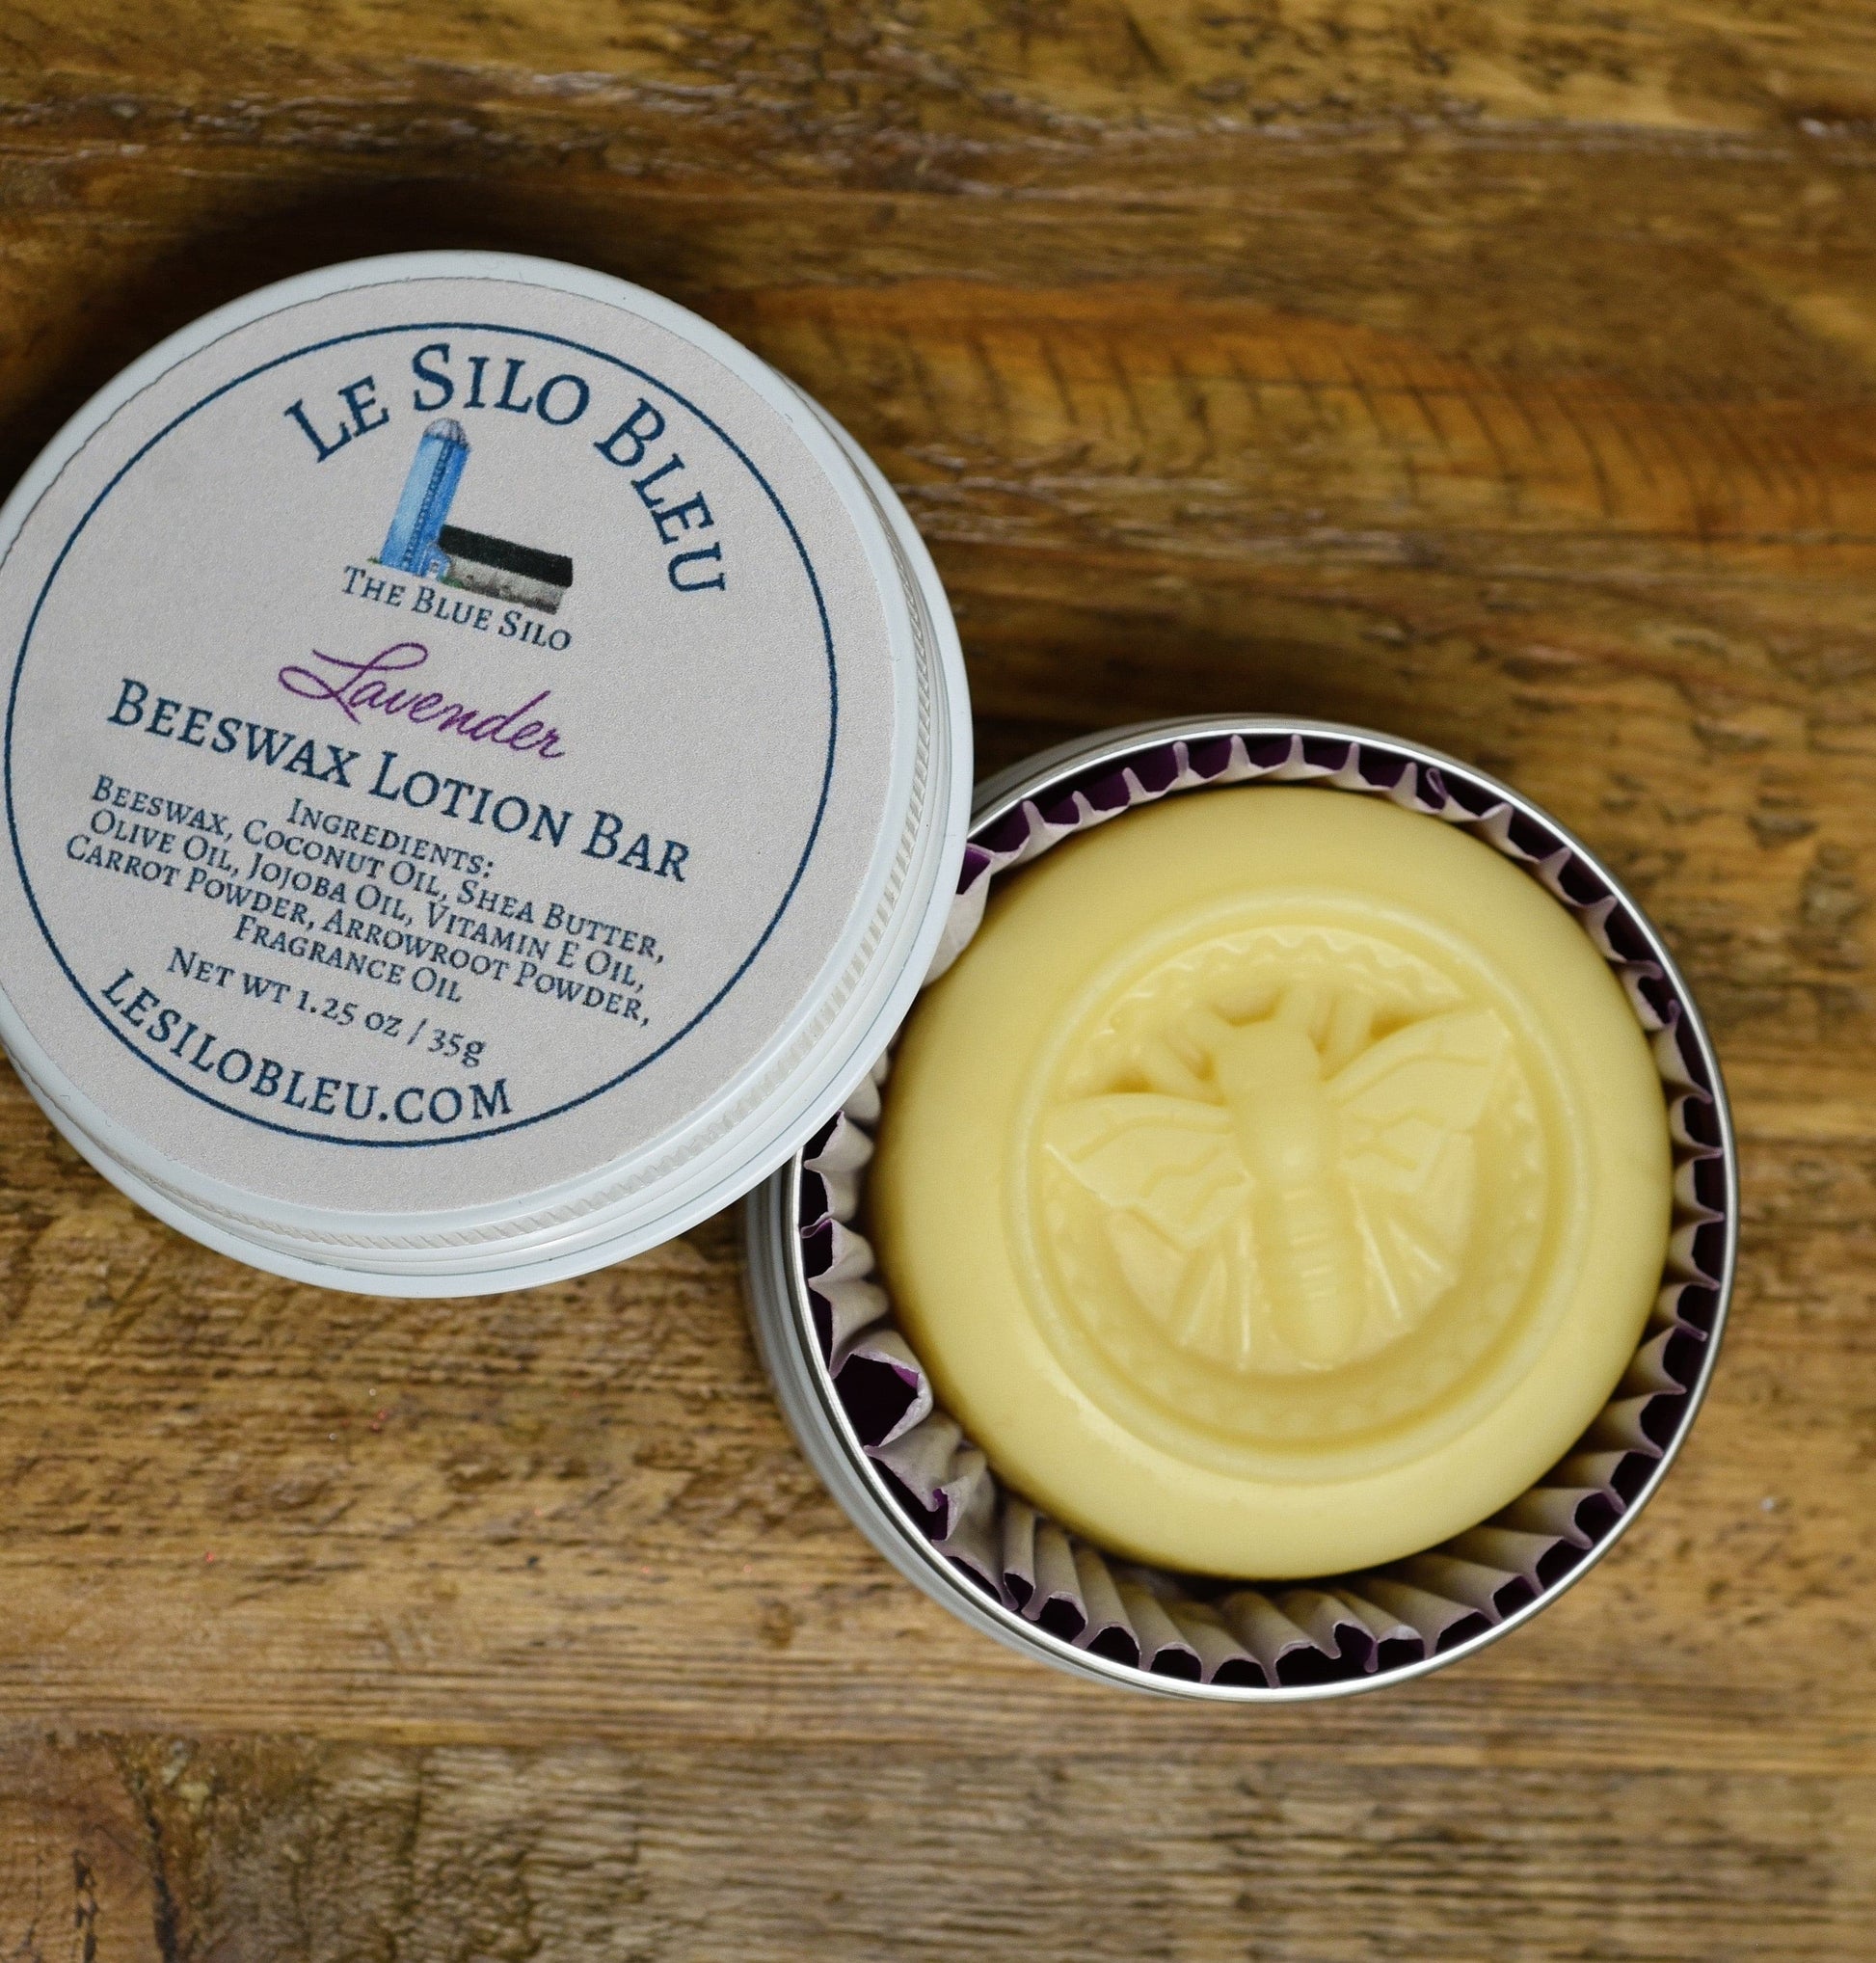 Lavender Beeswax Lotion Bar Tin 1.25oz showing bar with bee shape emblem. The open white tin is showing the yellowish round bar of lotion and they are laying on a wooden table.